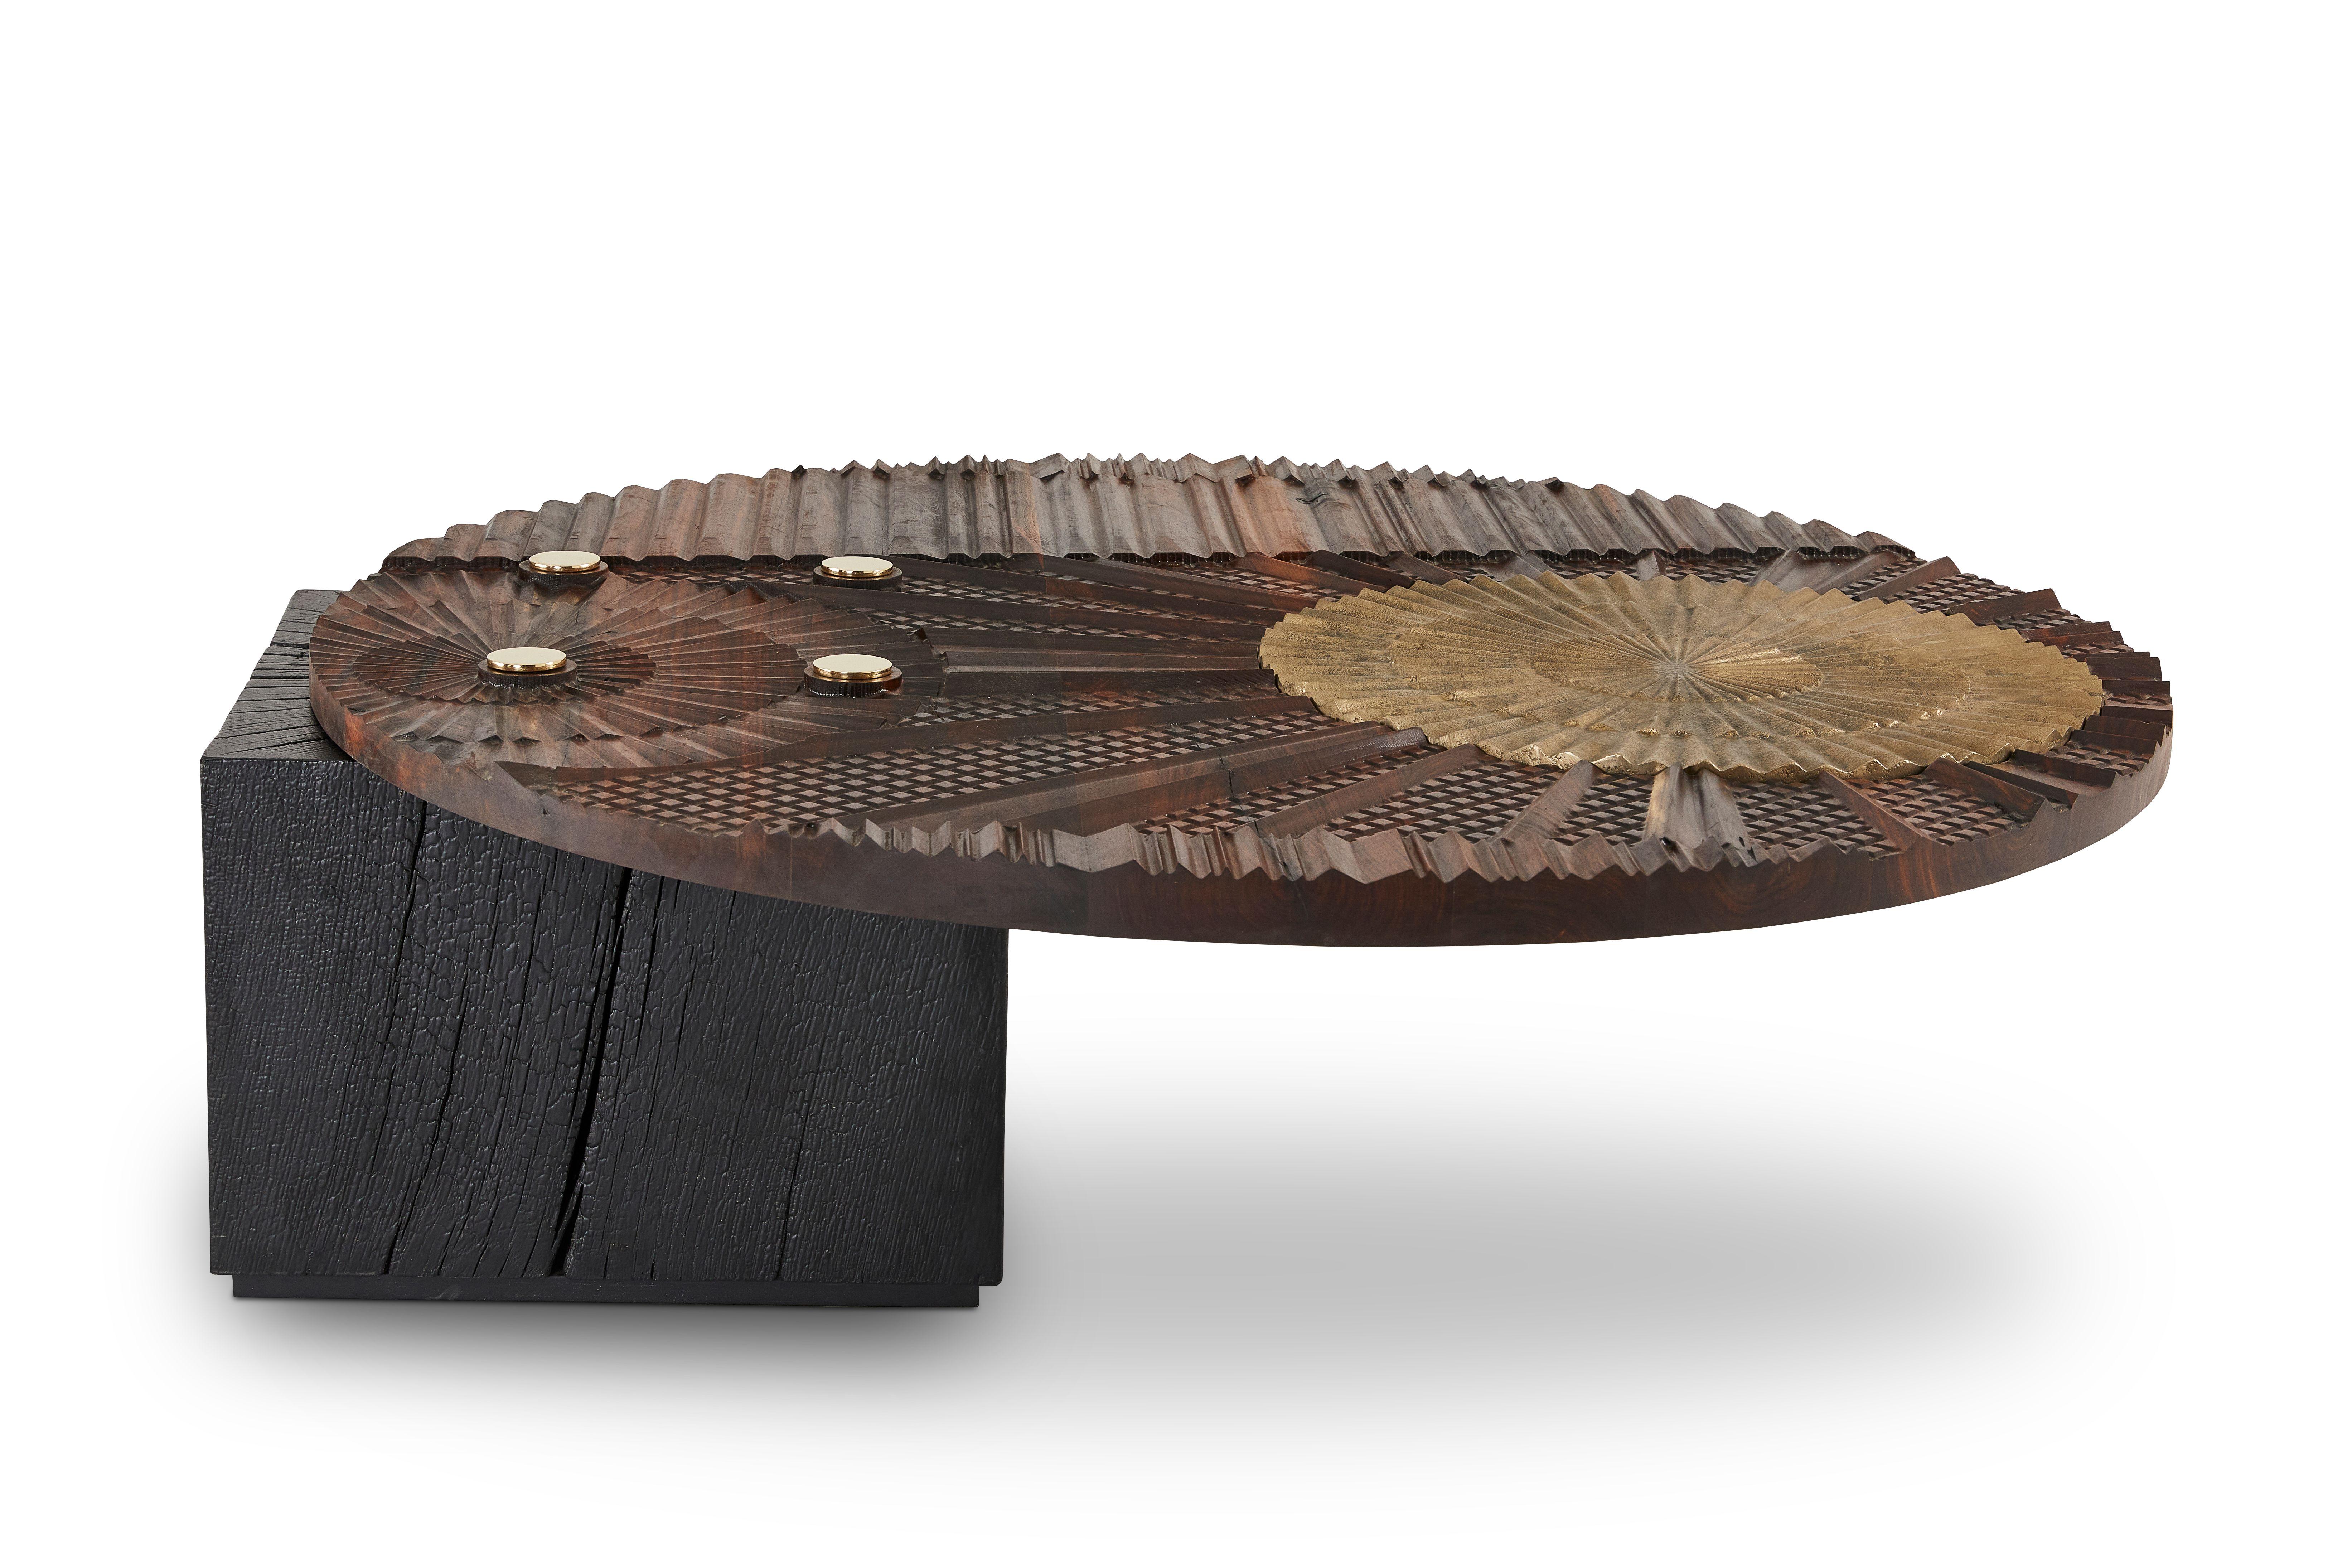 Oromo coffee table by Egg Designs
Dimensions: 125 L X 120 D X 49 H cm
Materials: walnut timber, solid cast brass, brass, shou sugi ban solid oak cant.

Founded by South Africans and life partners, Greg and Roche Dry - Egg is a unique perspective